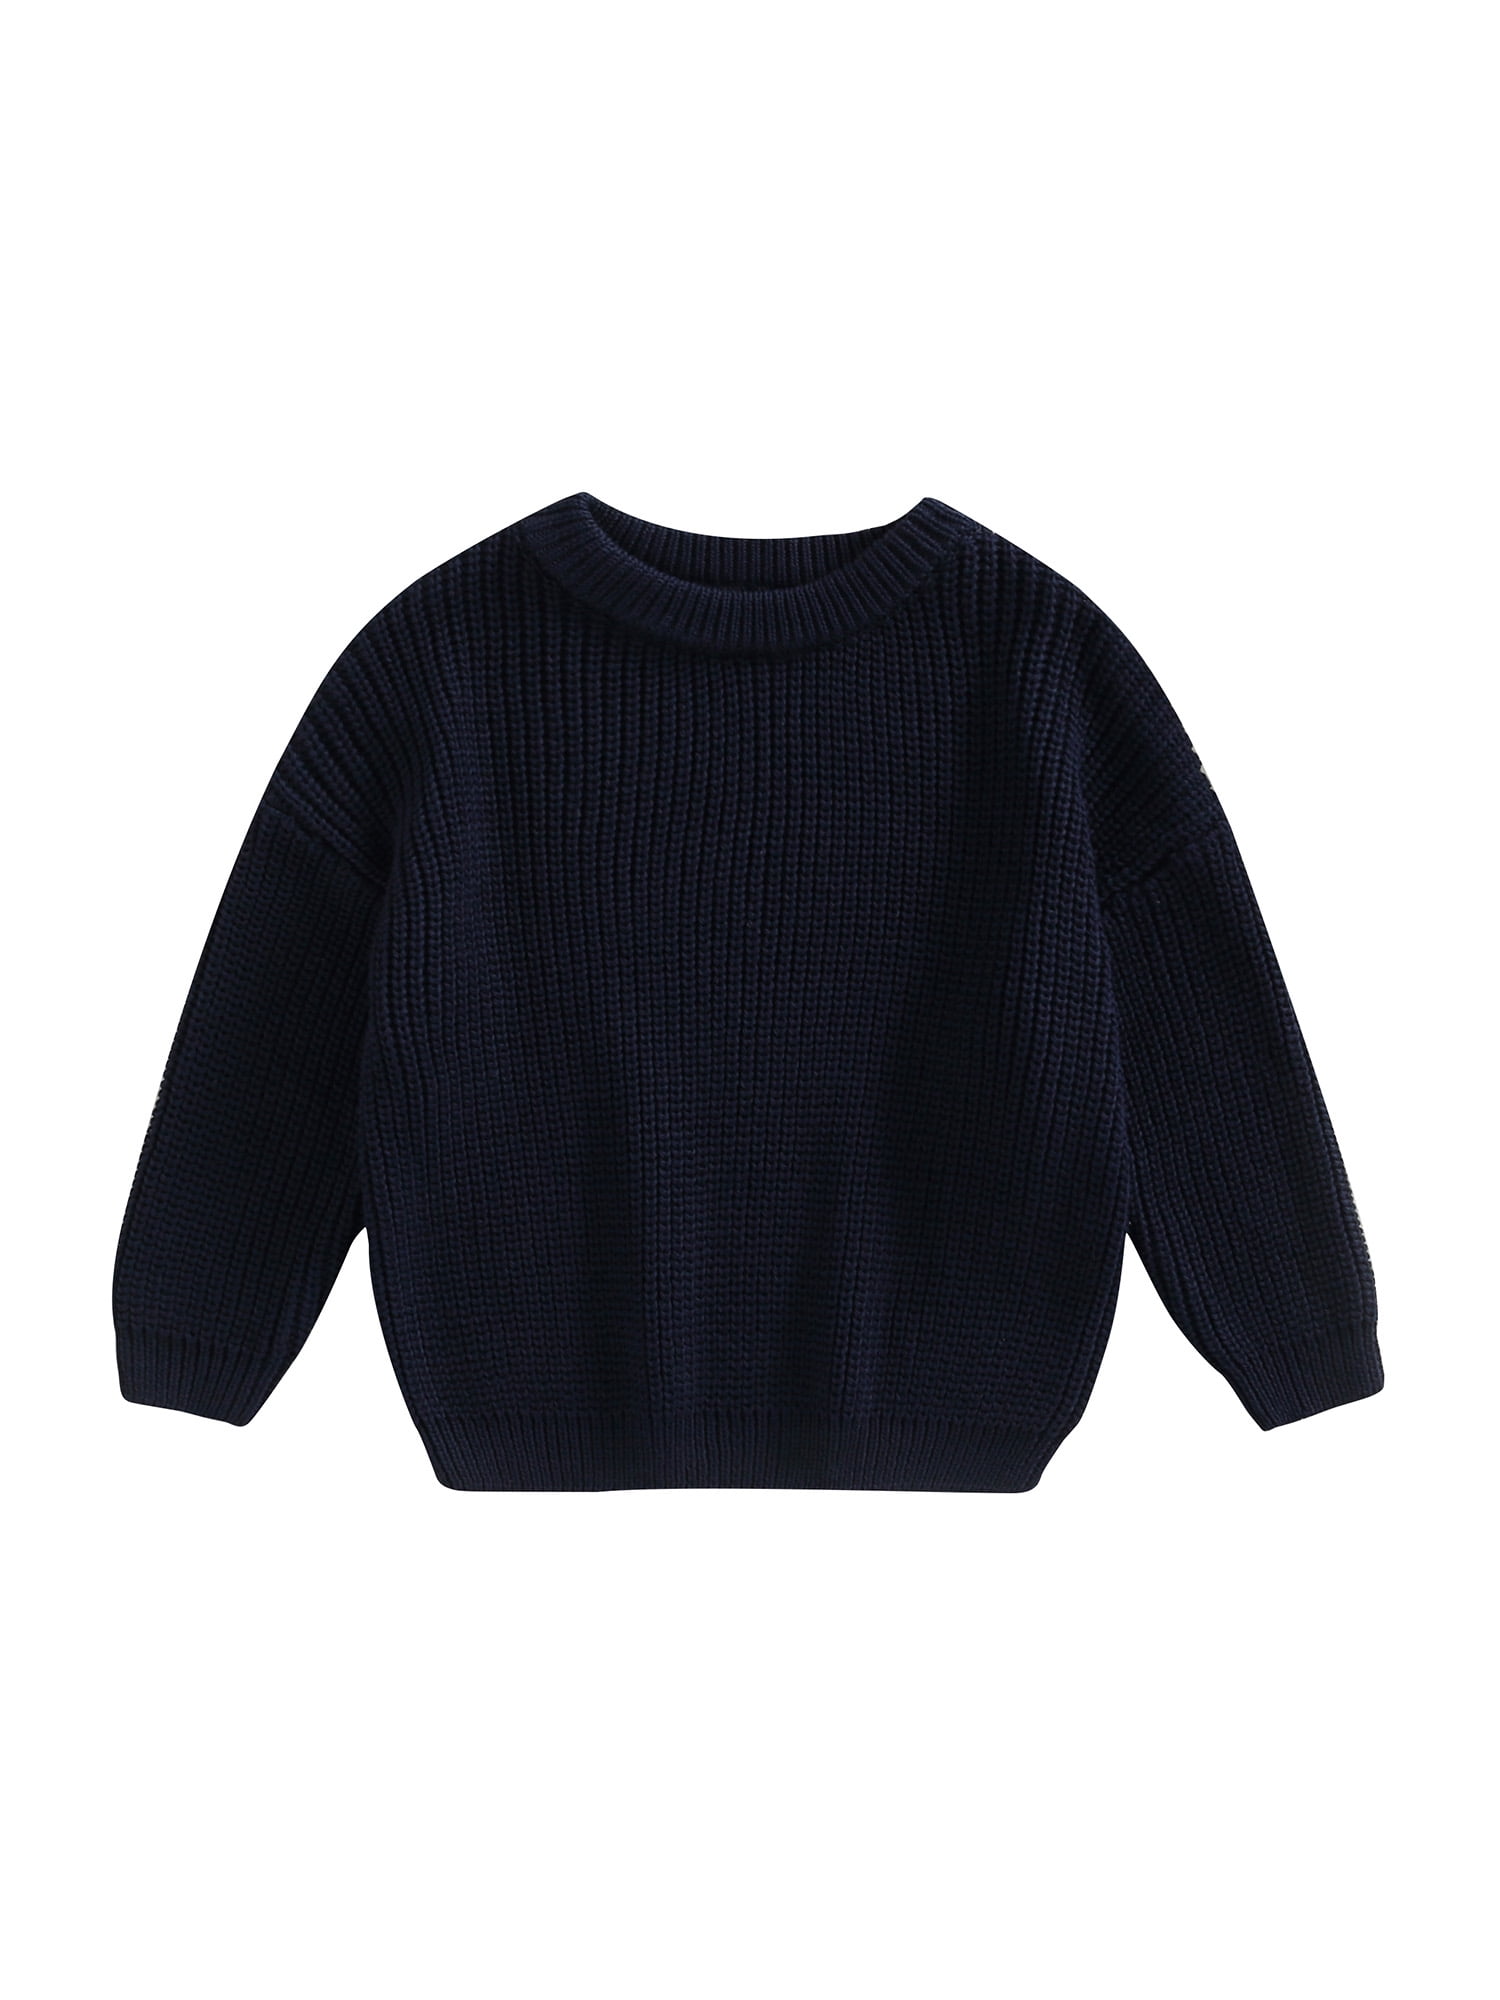 Toddler Infant Baby Girl Boy Knit Sweater Solid Color Oversized Crewneck Warm Pullover Sweatshrit Fall Winter Tops 